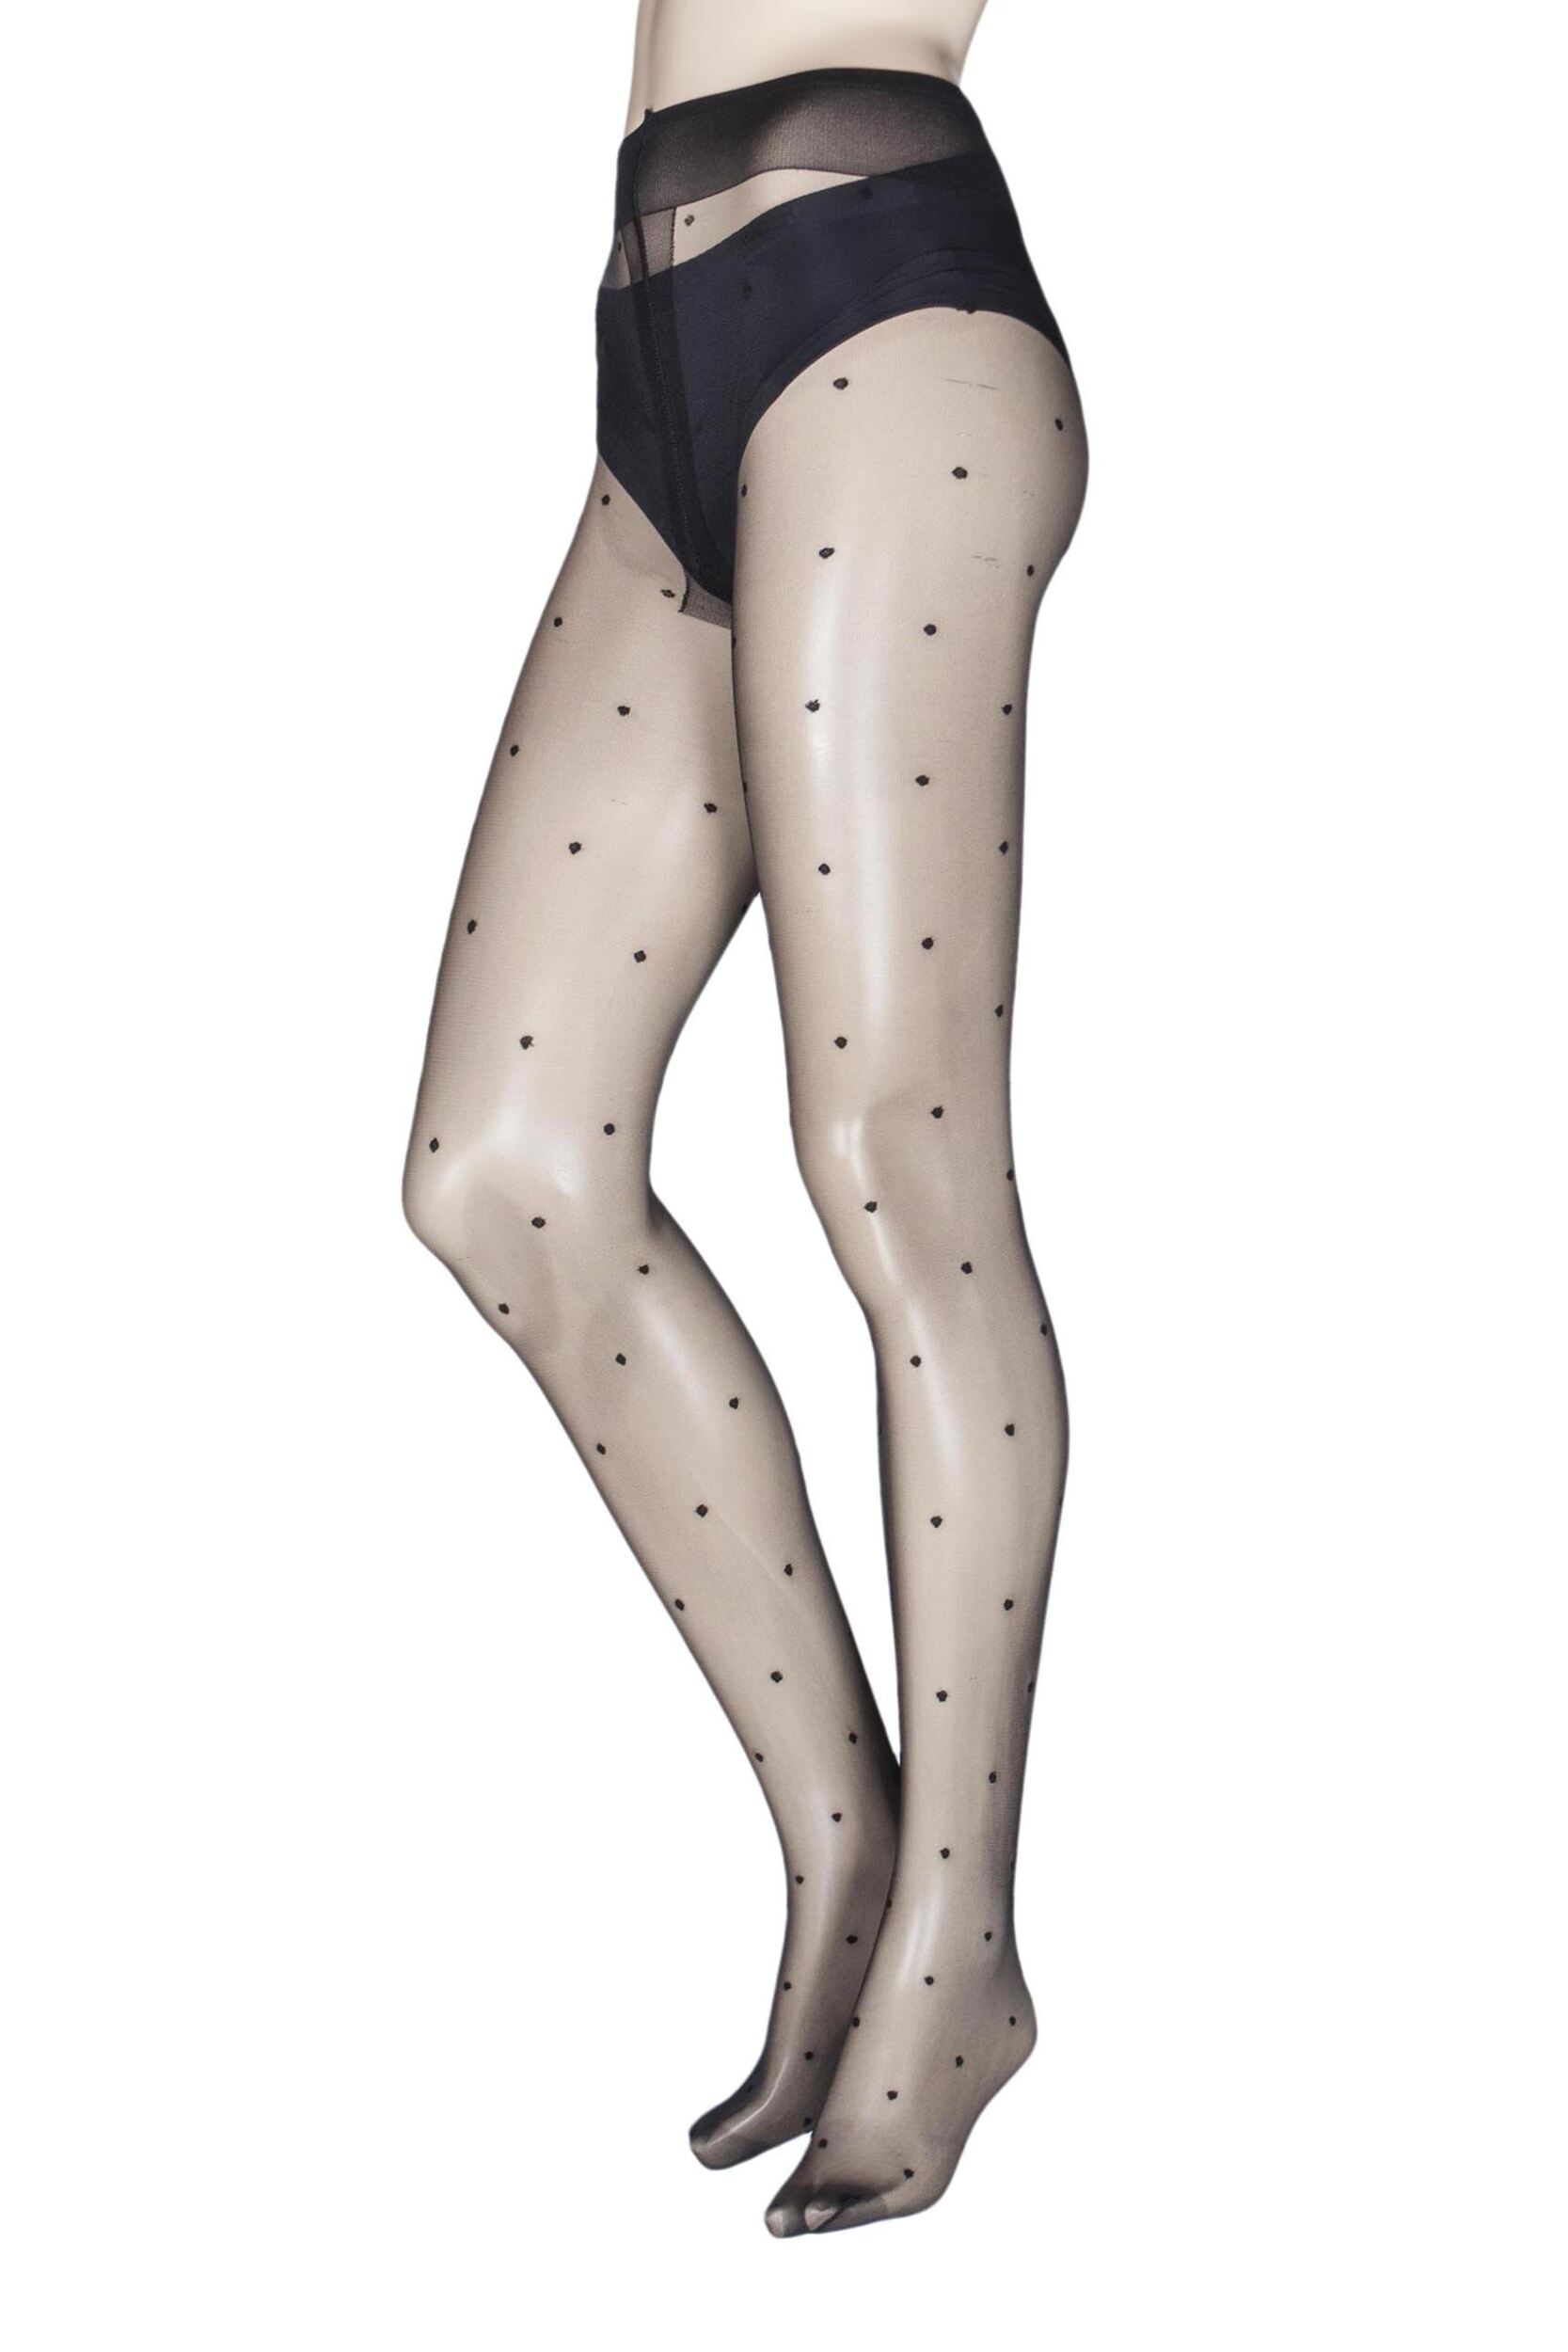 1 Pair Black Anguria Spotted Tights Ladies Extra Large - Trasparenze